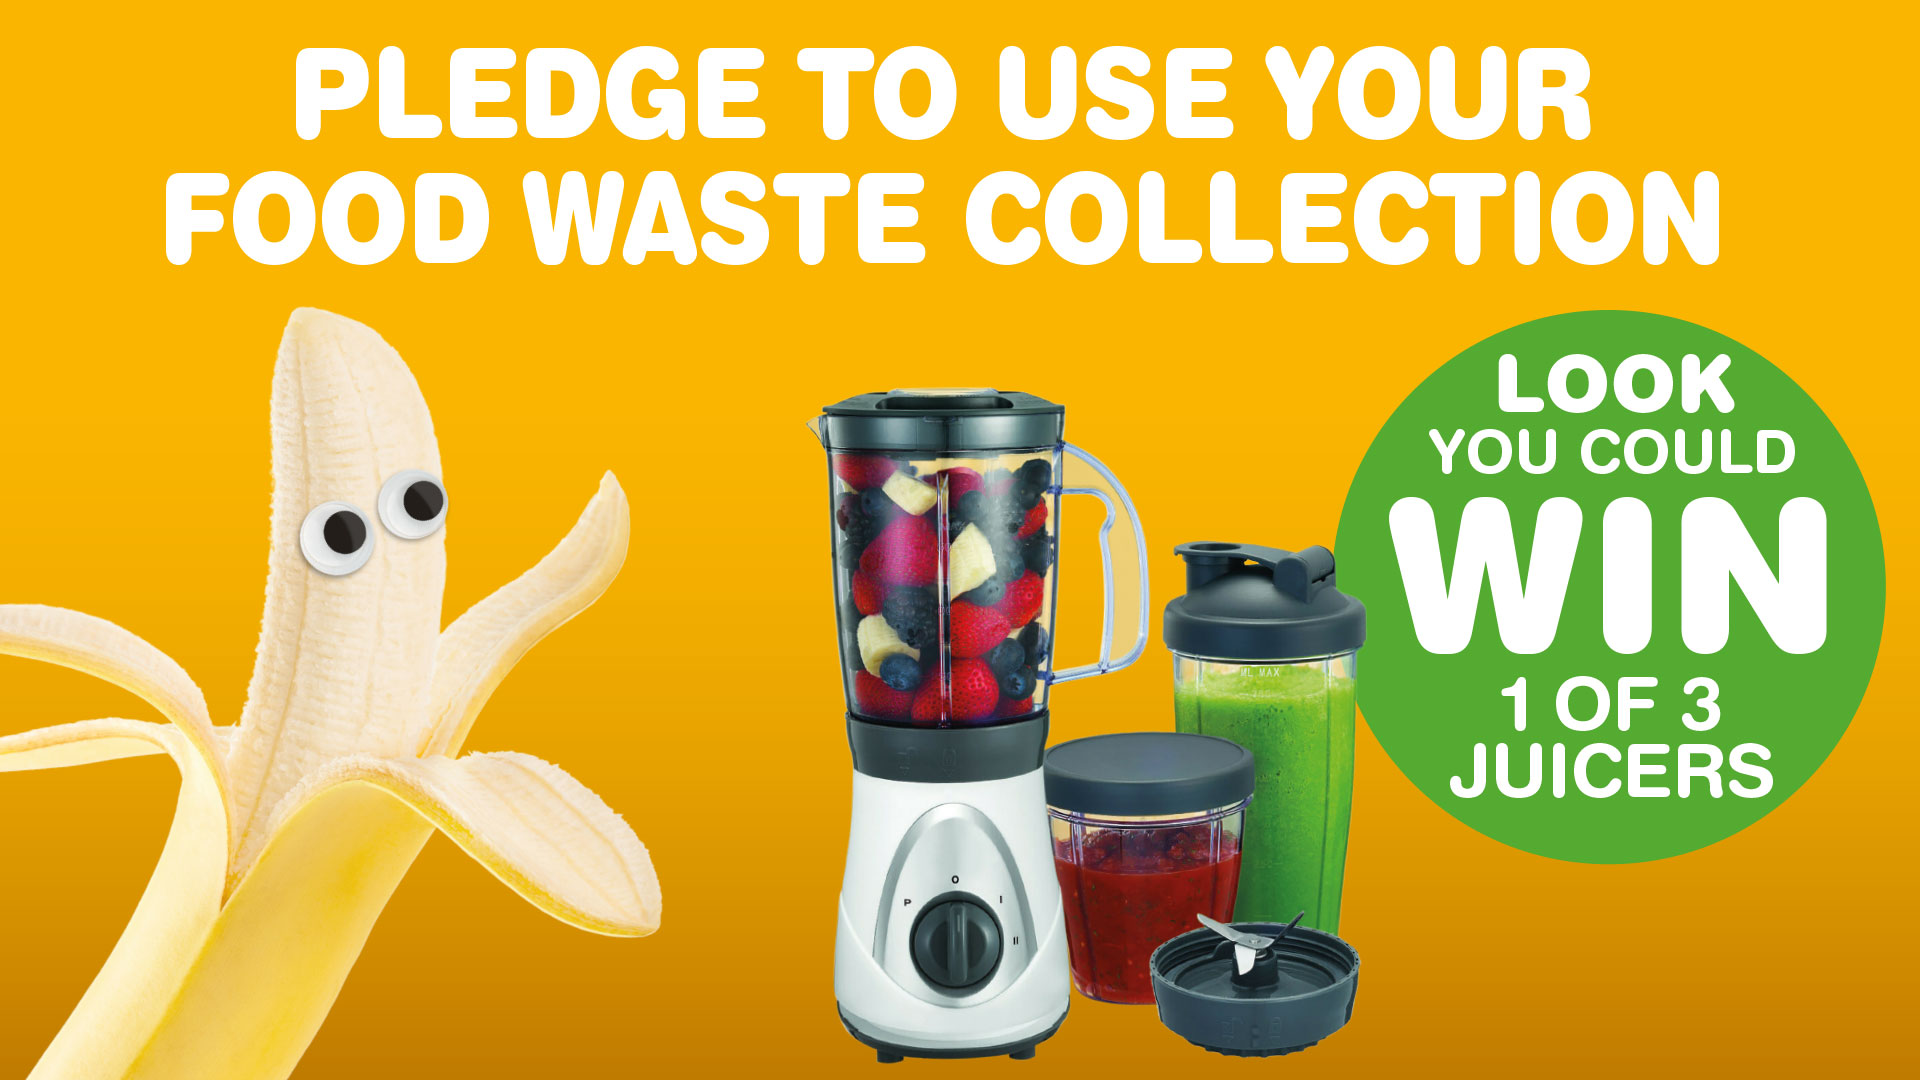 Pledge to use your food waste collection